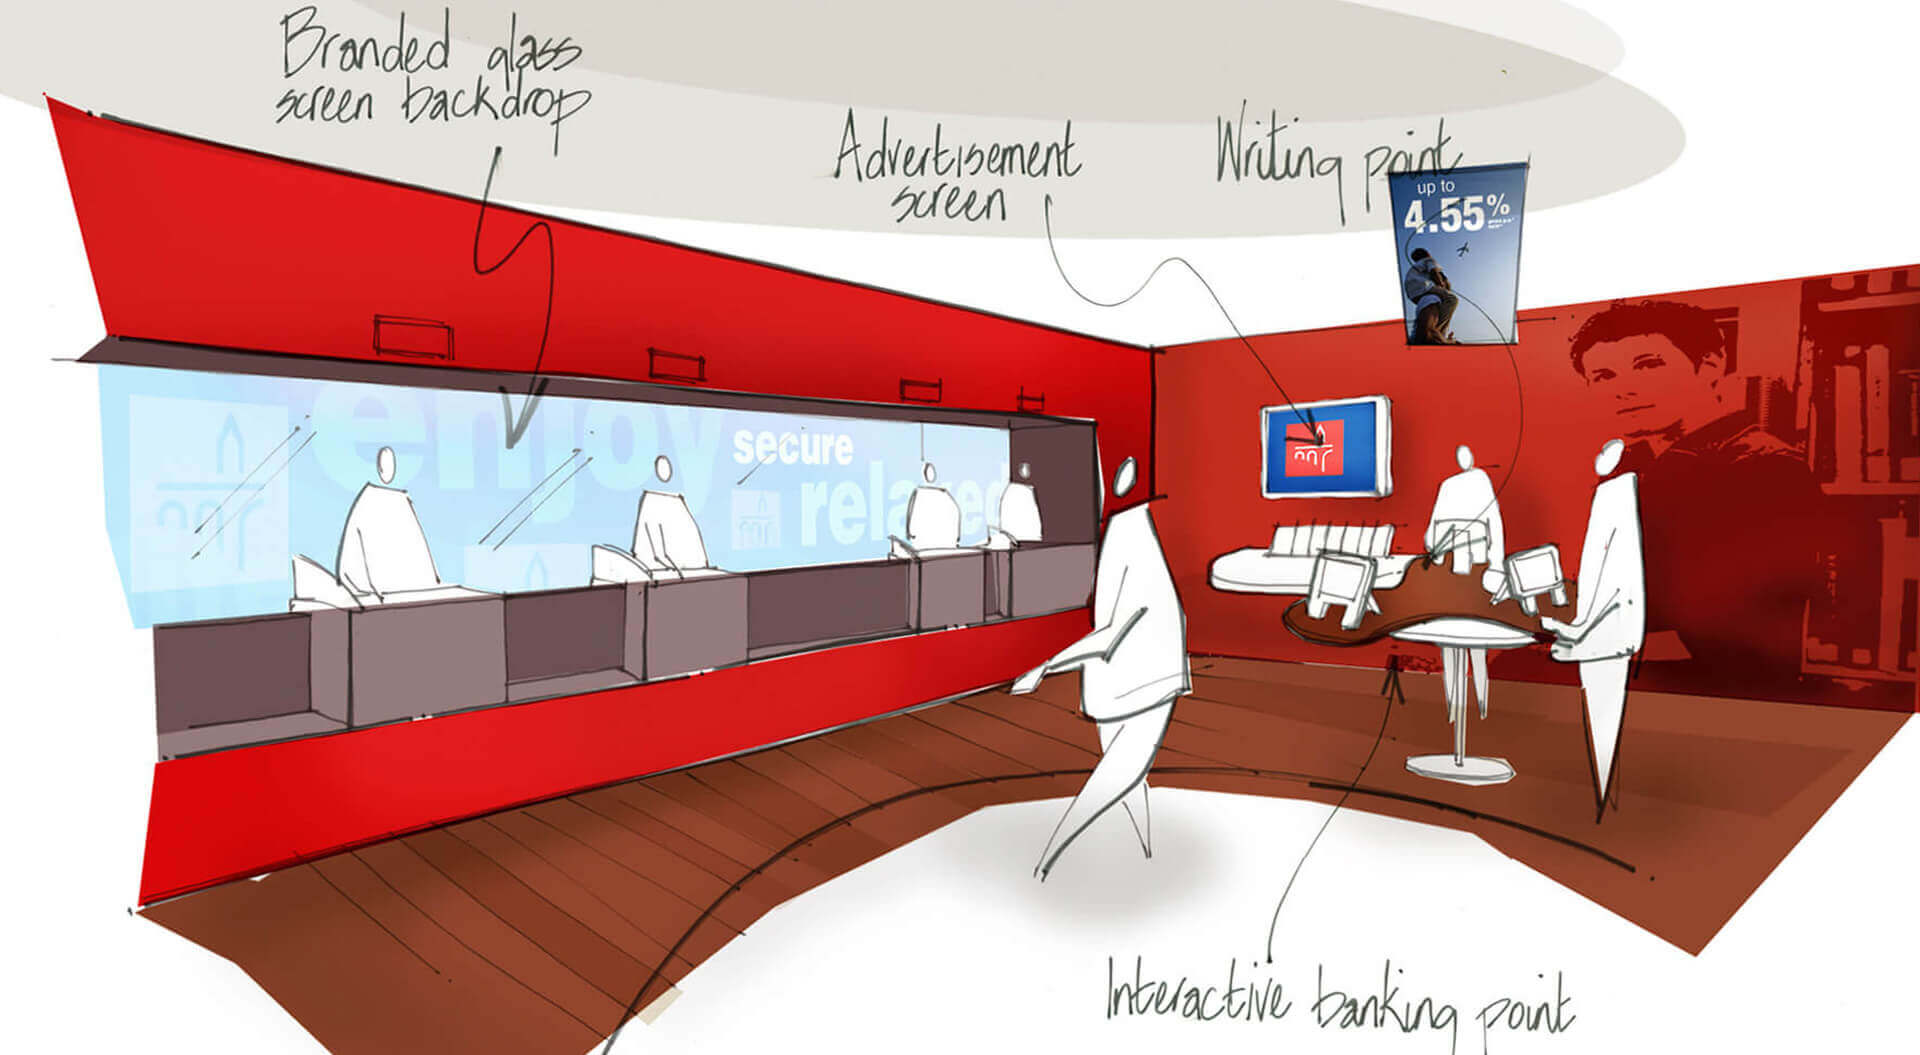 HSBC Bank Retail Interior Concept Visual - Branch interactive banking point and teller counter sketch